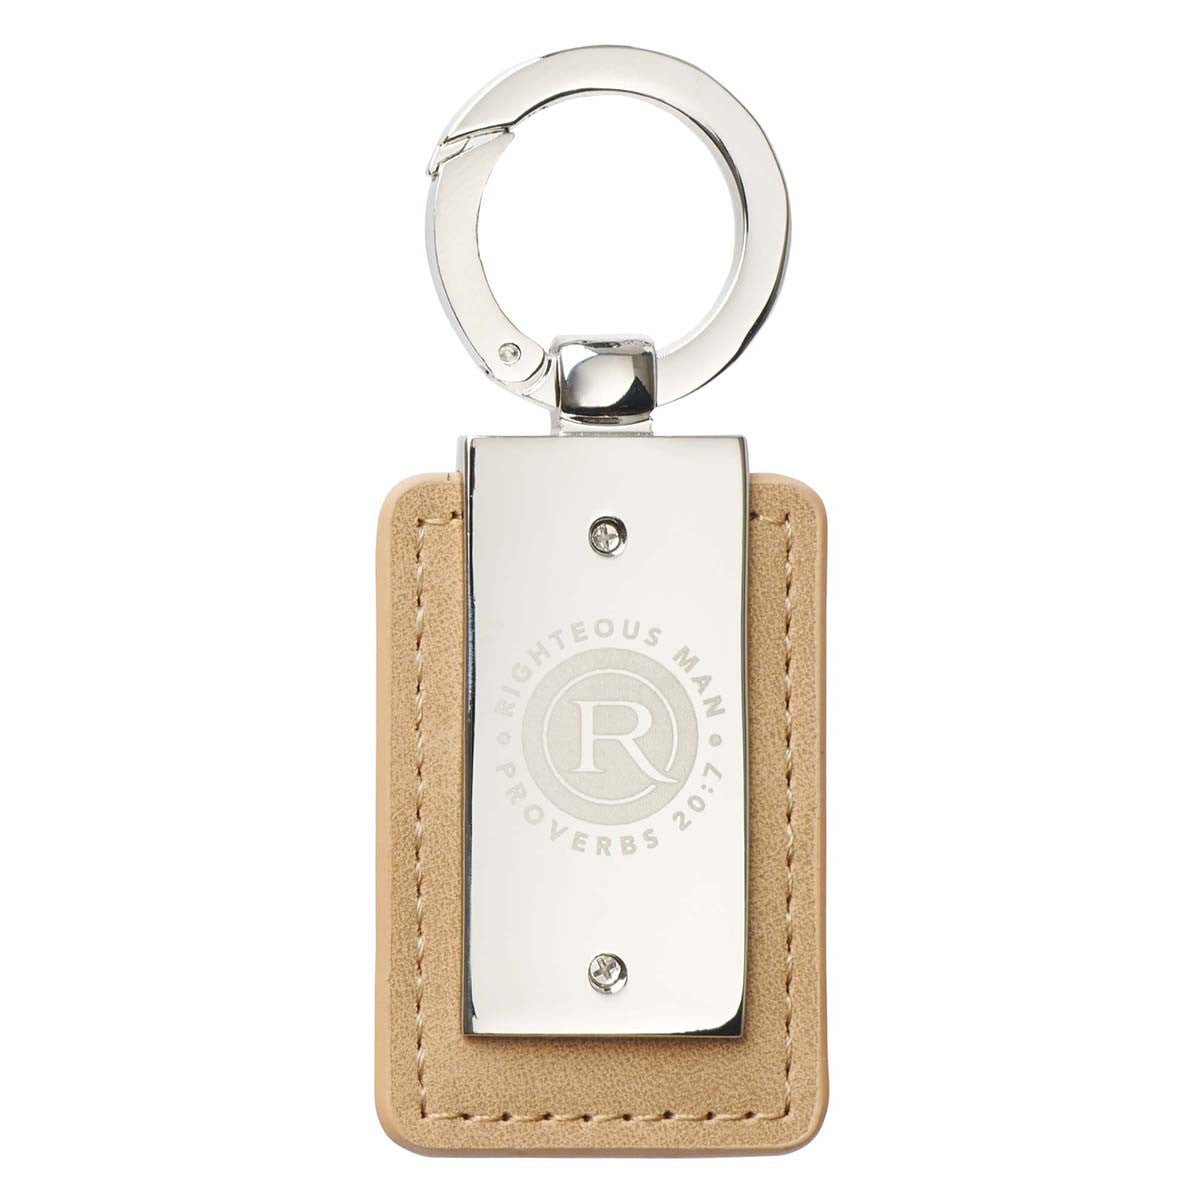 Specialty Item - Righteous Man Key Ring in Tin - Proverbs 20:7